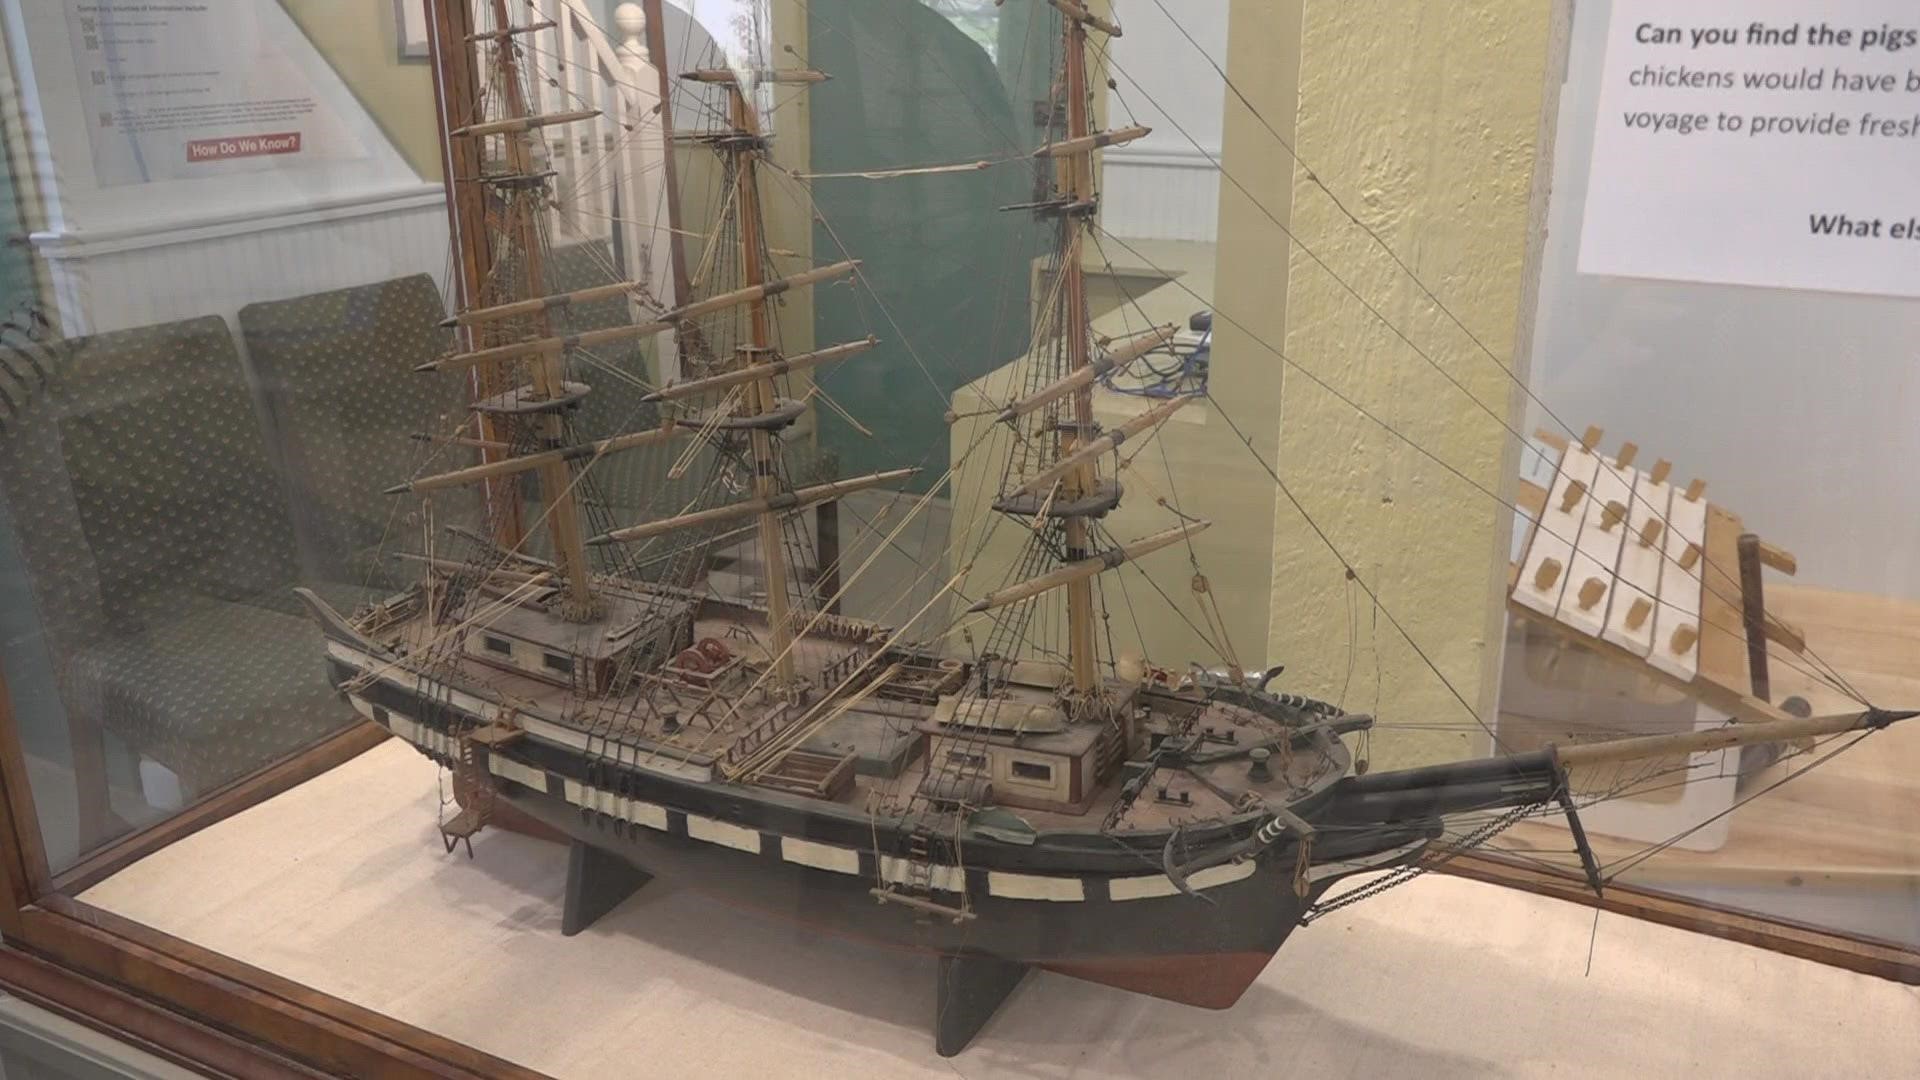 The museum decided to dedicate a new, permanent exhibit to honor the sailors and their families who made the town what it is today.